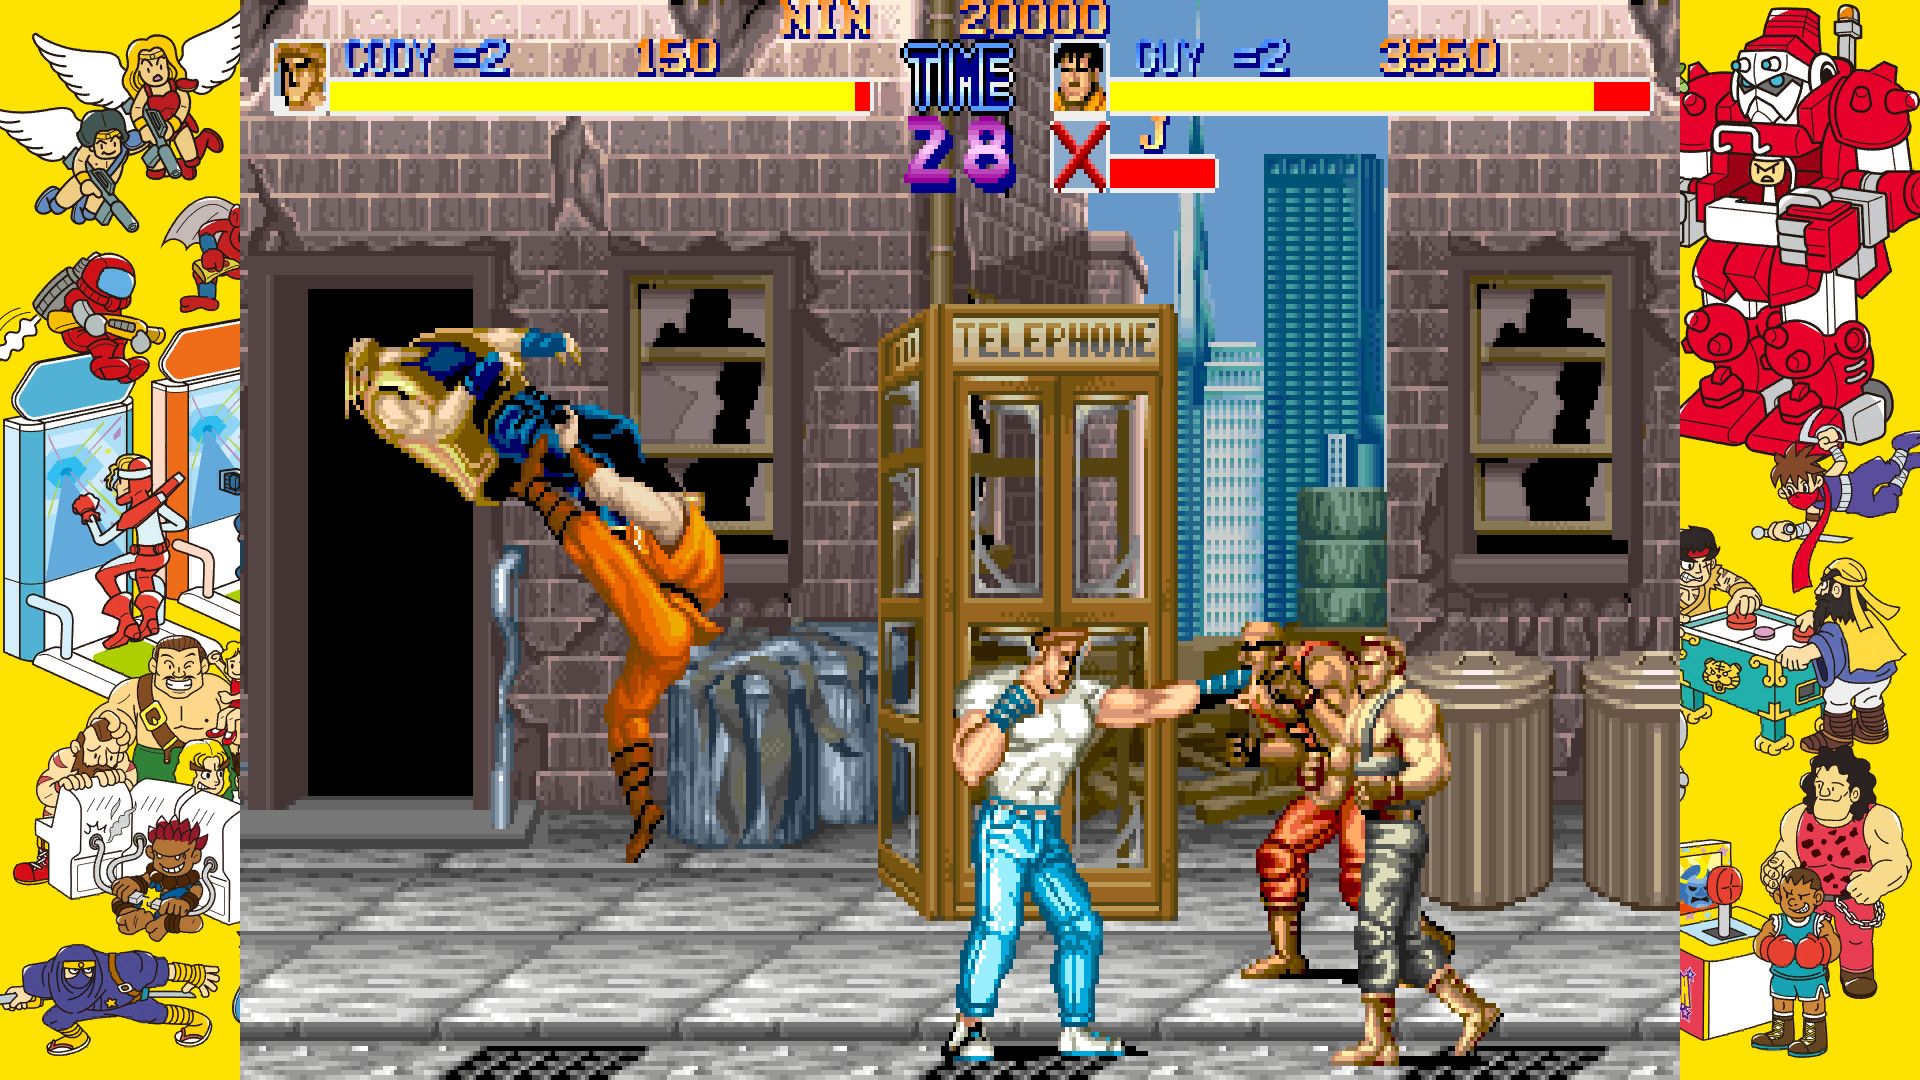 Get the classic SNES game Final Fight for FREE on Steam